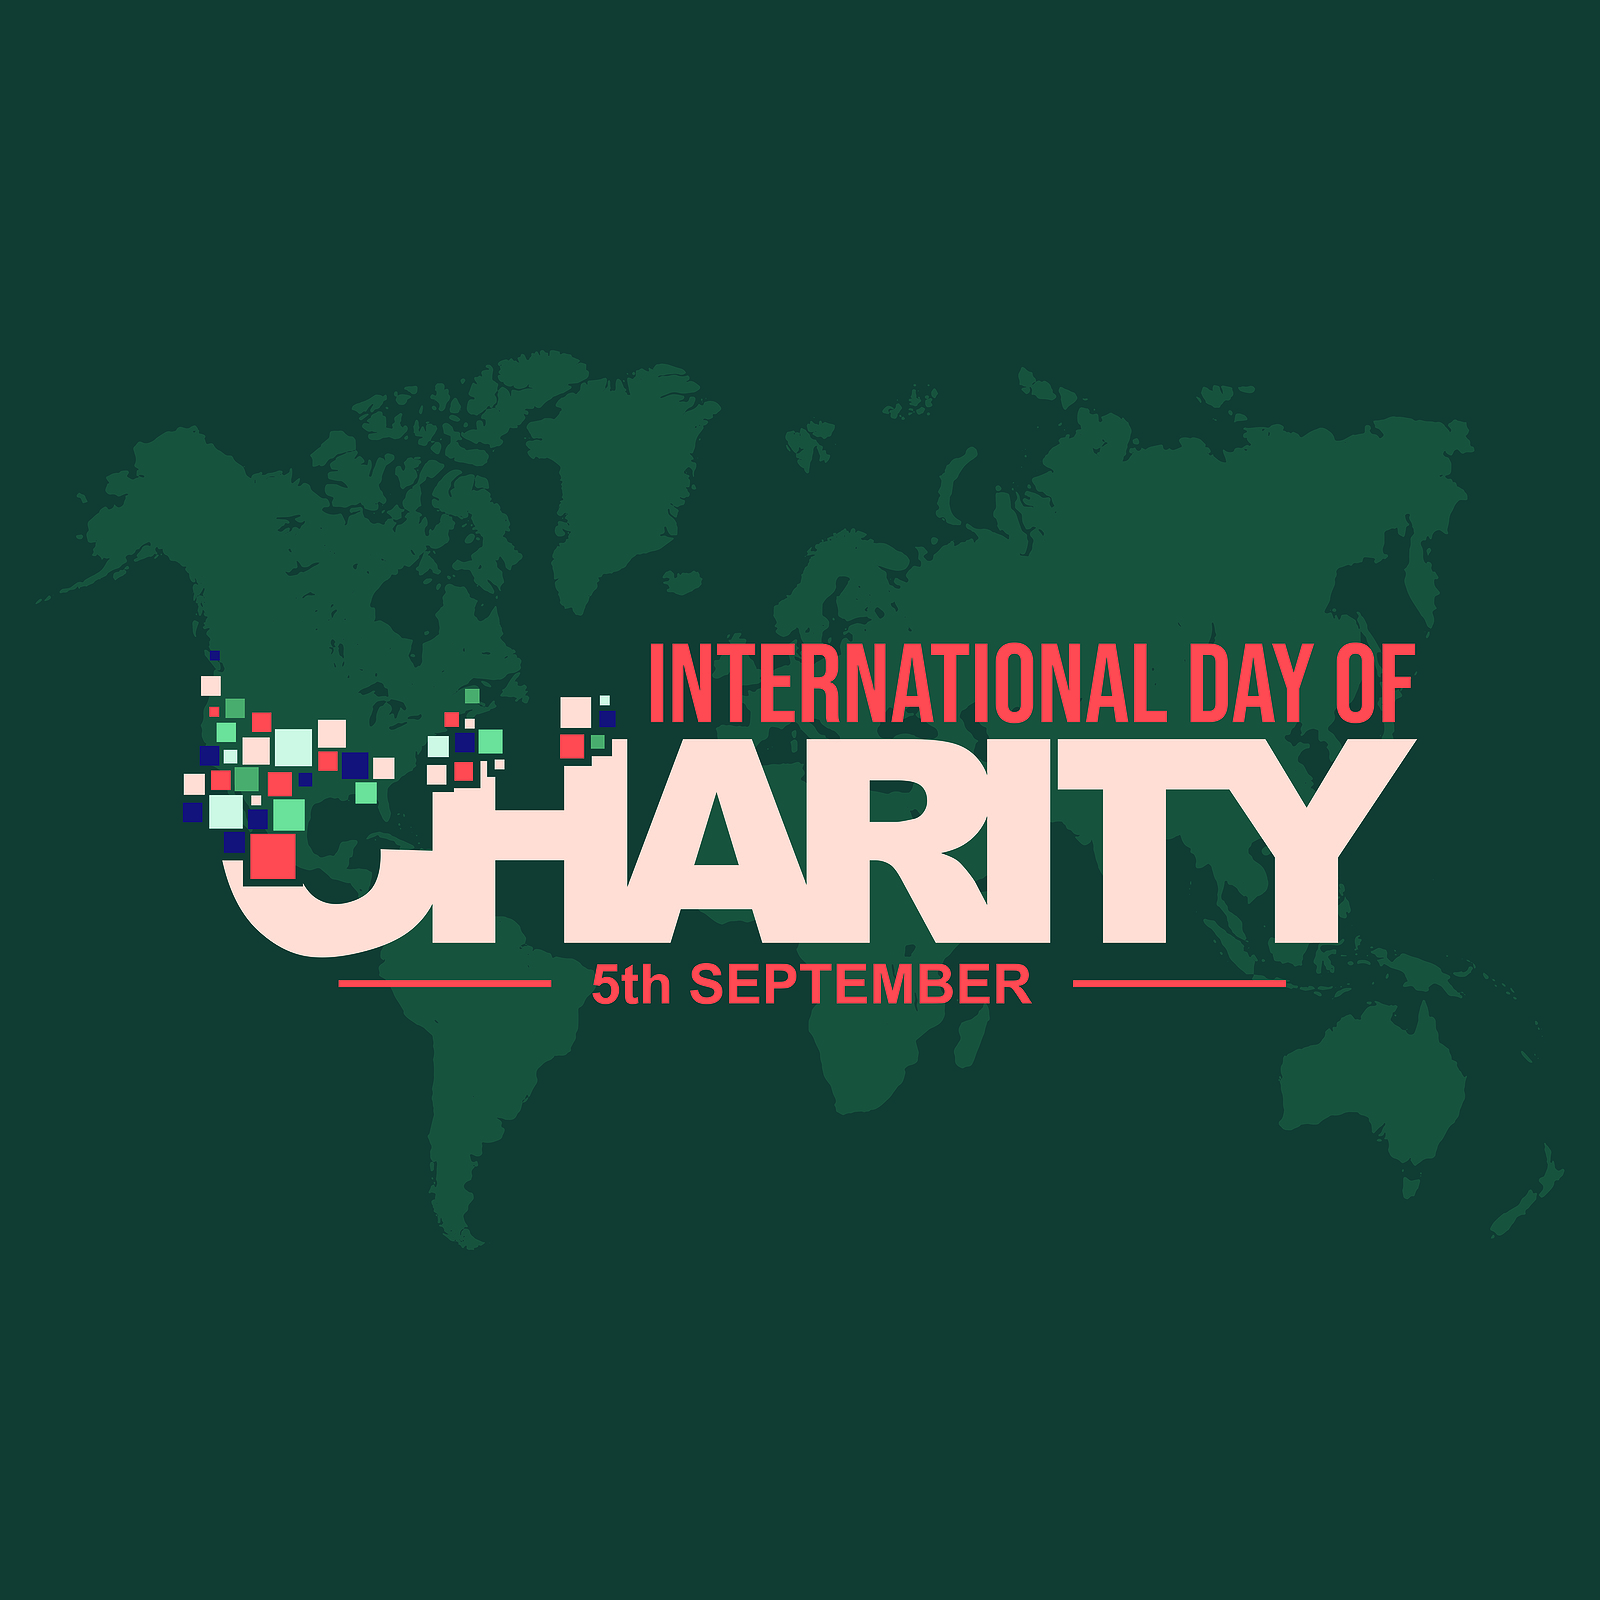 International Day of Charity